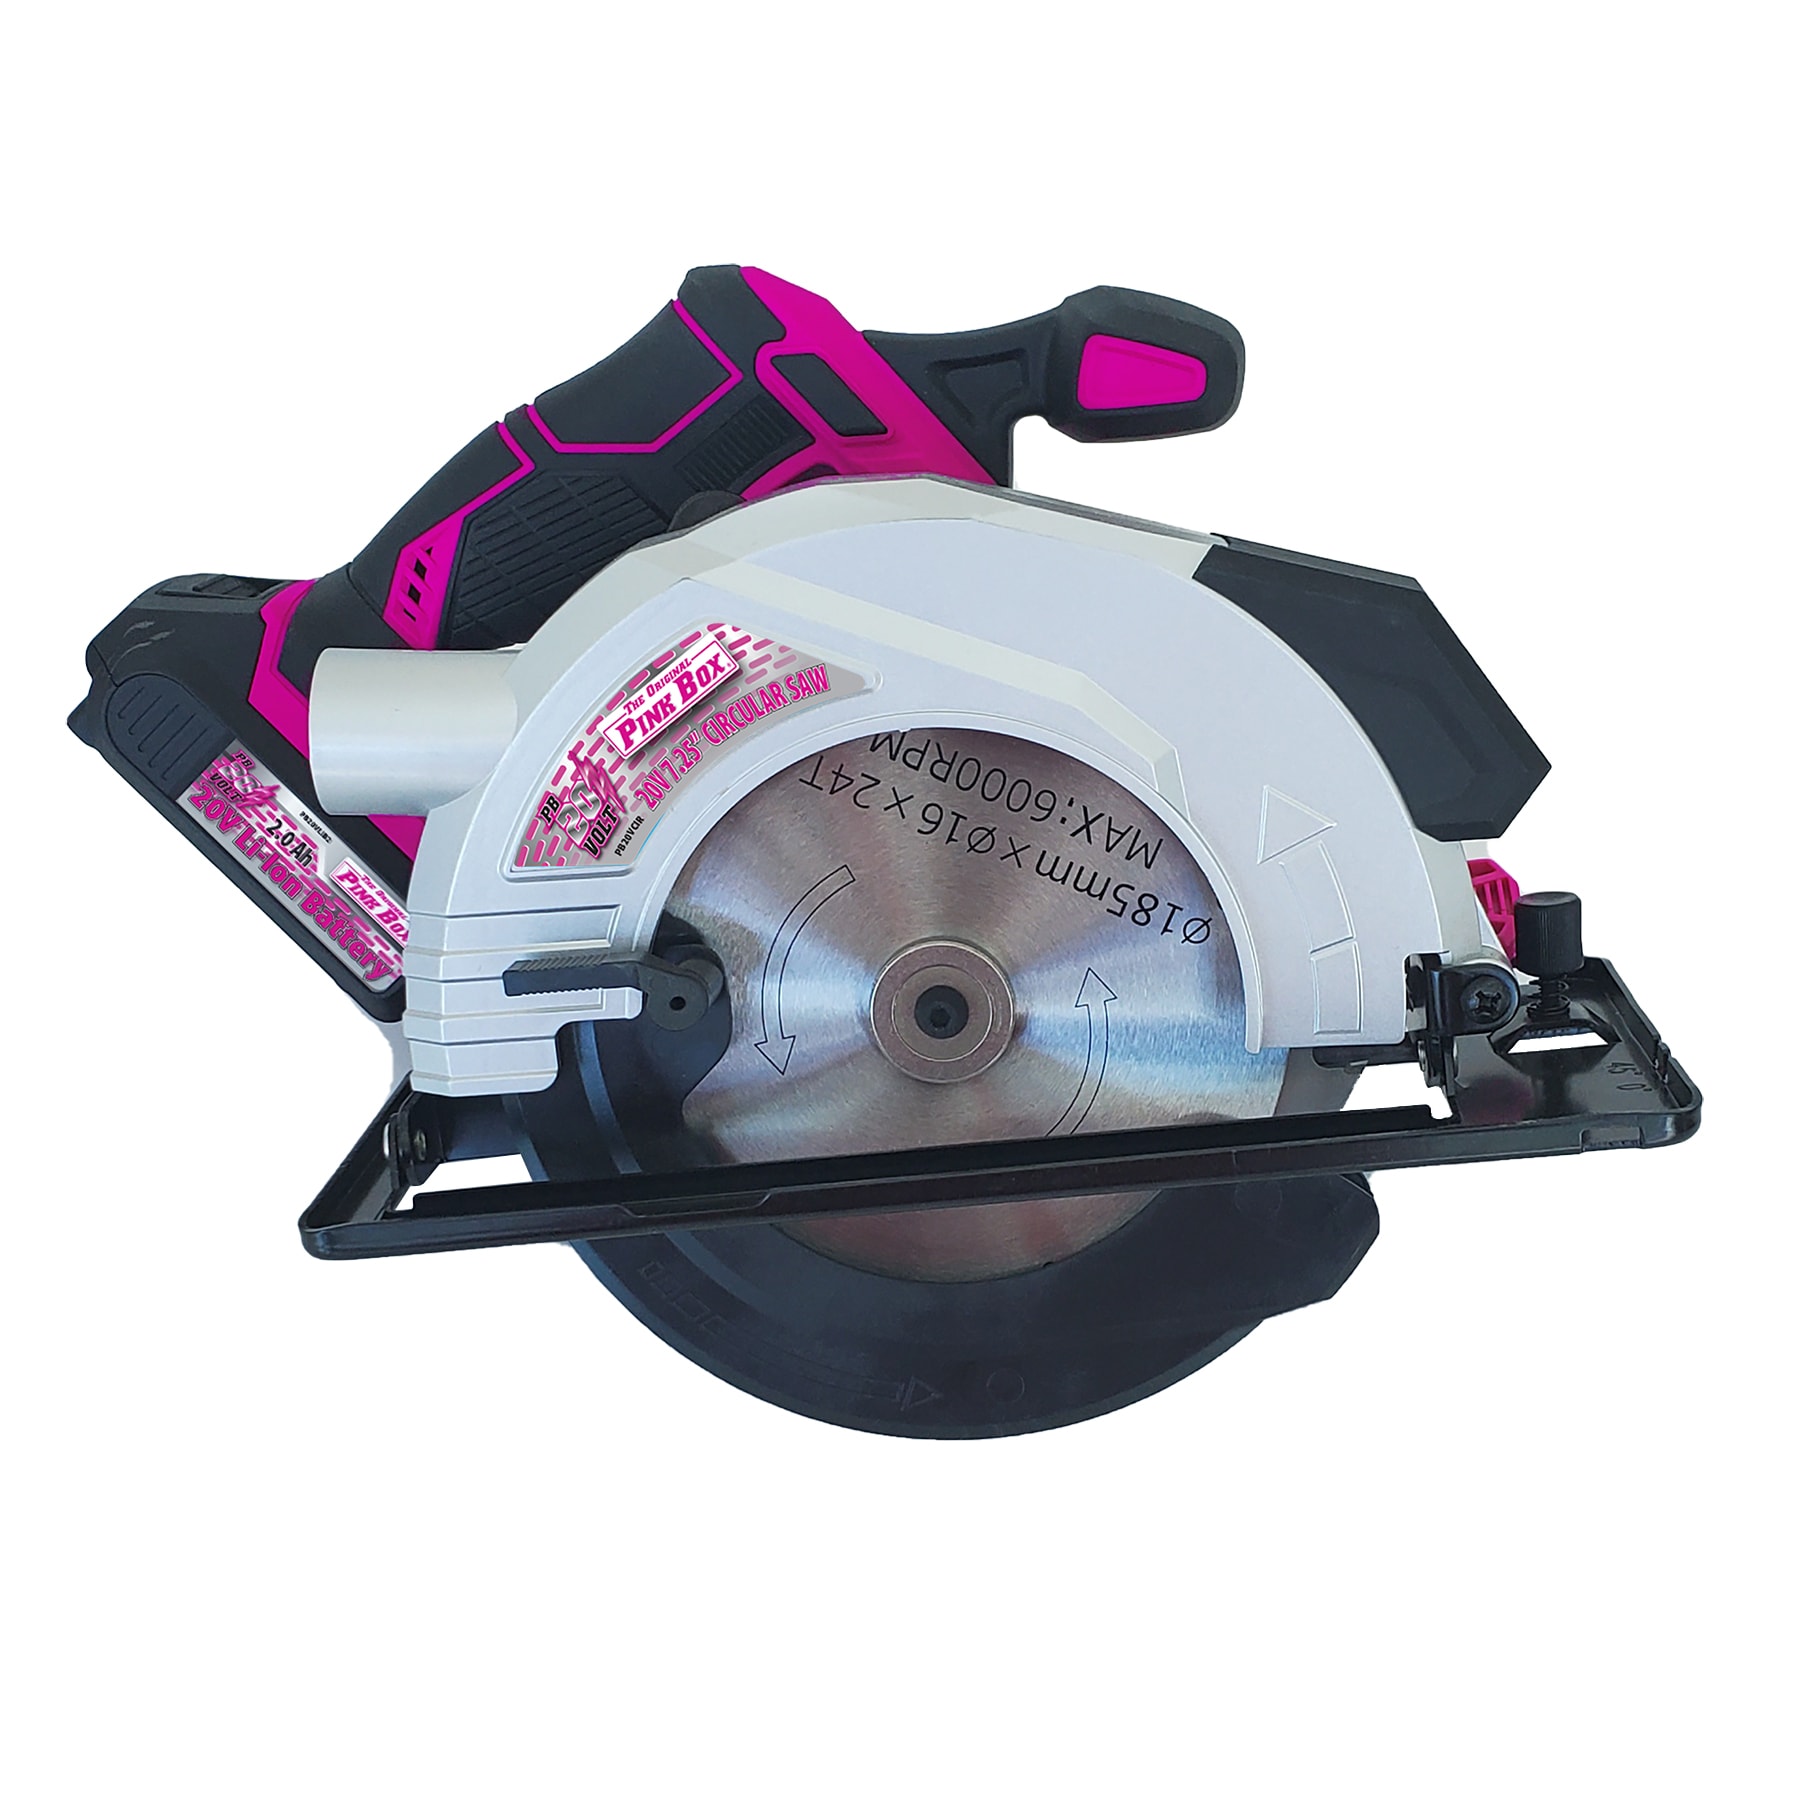 The Original Pink Box 25-ft Auto Lock Tape Measure with Metric and